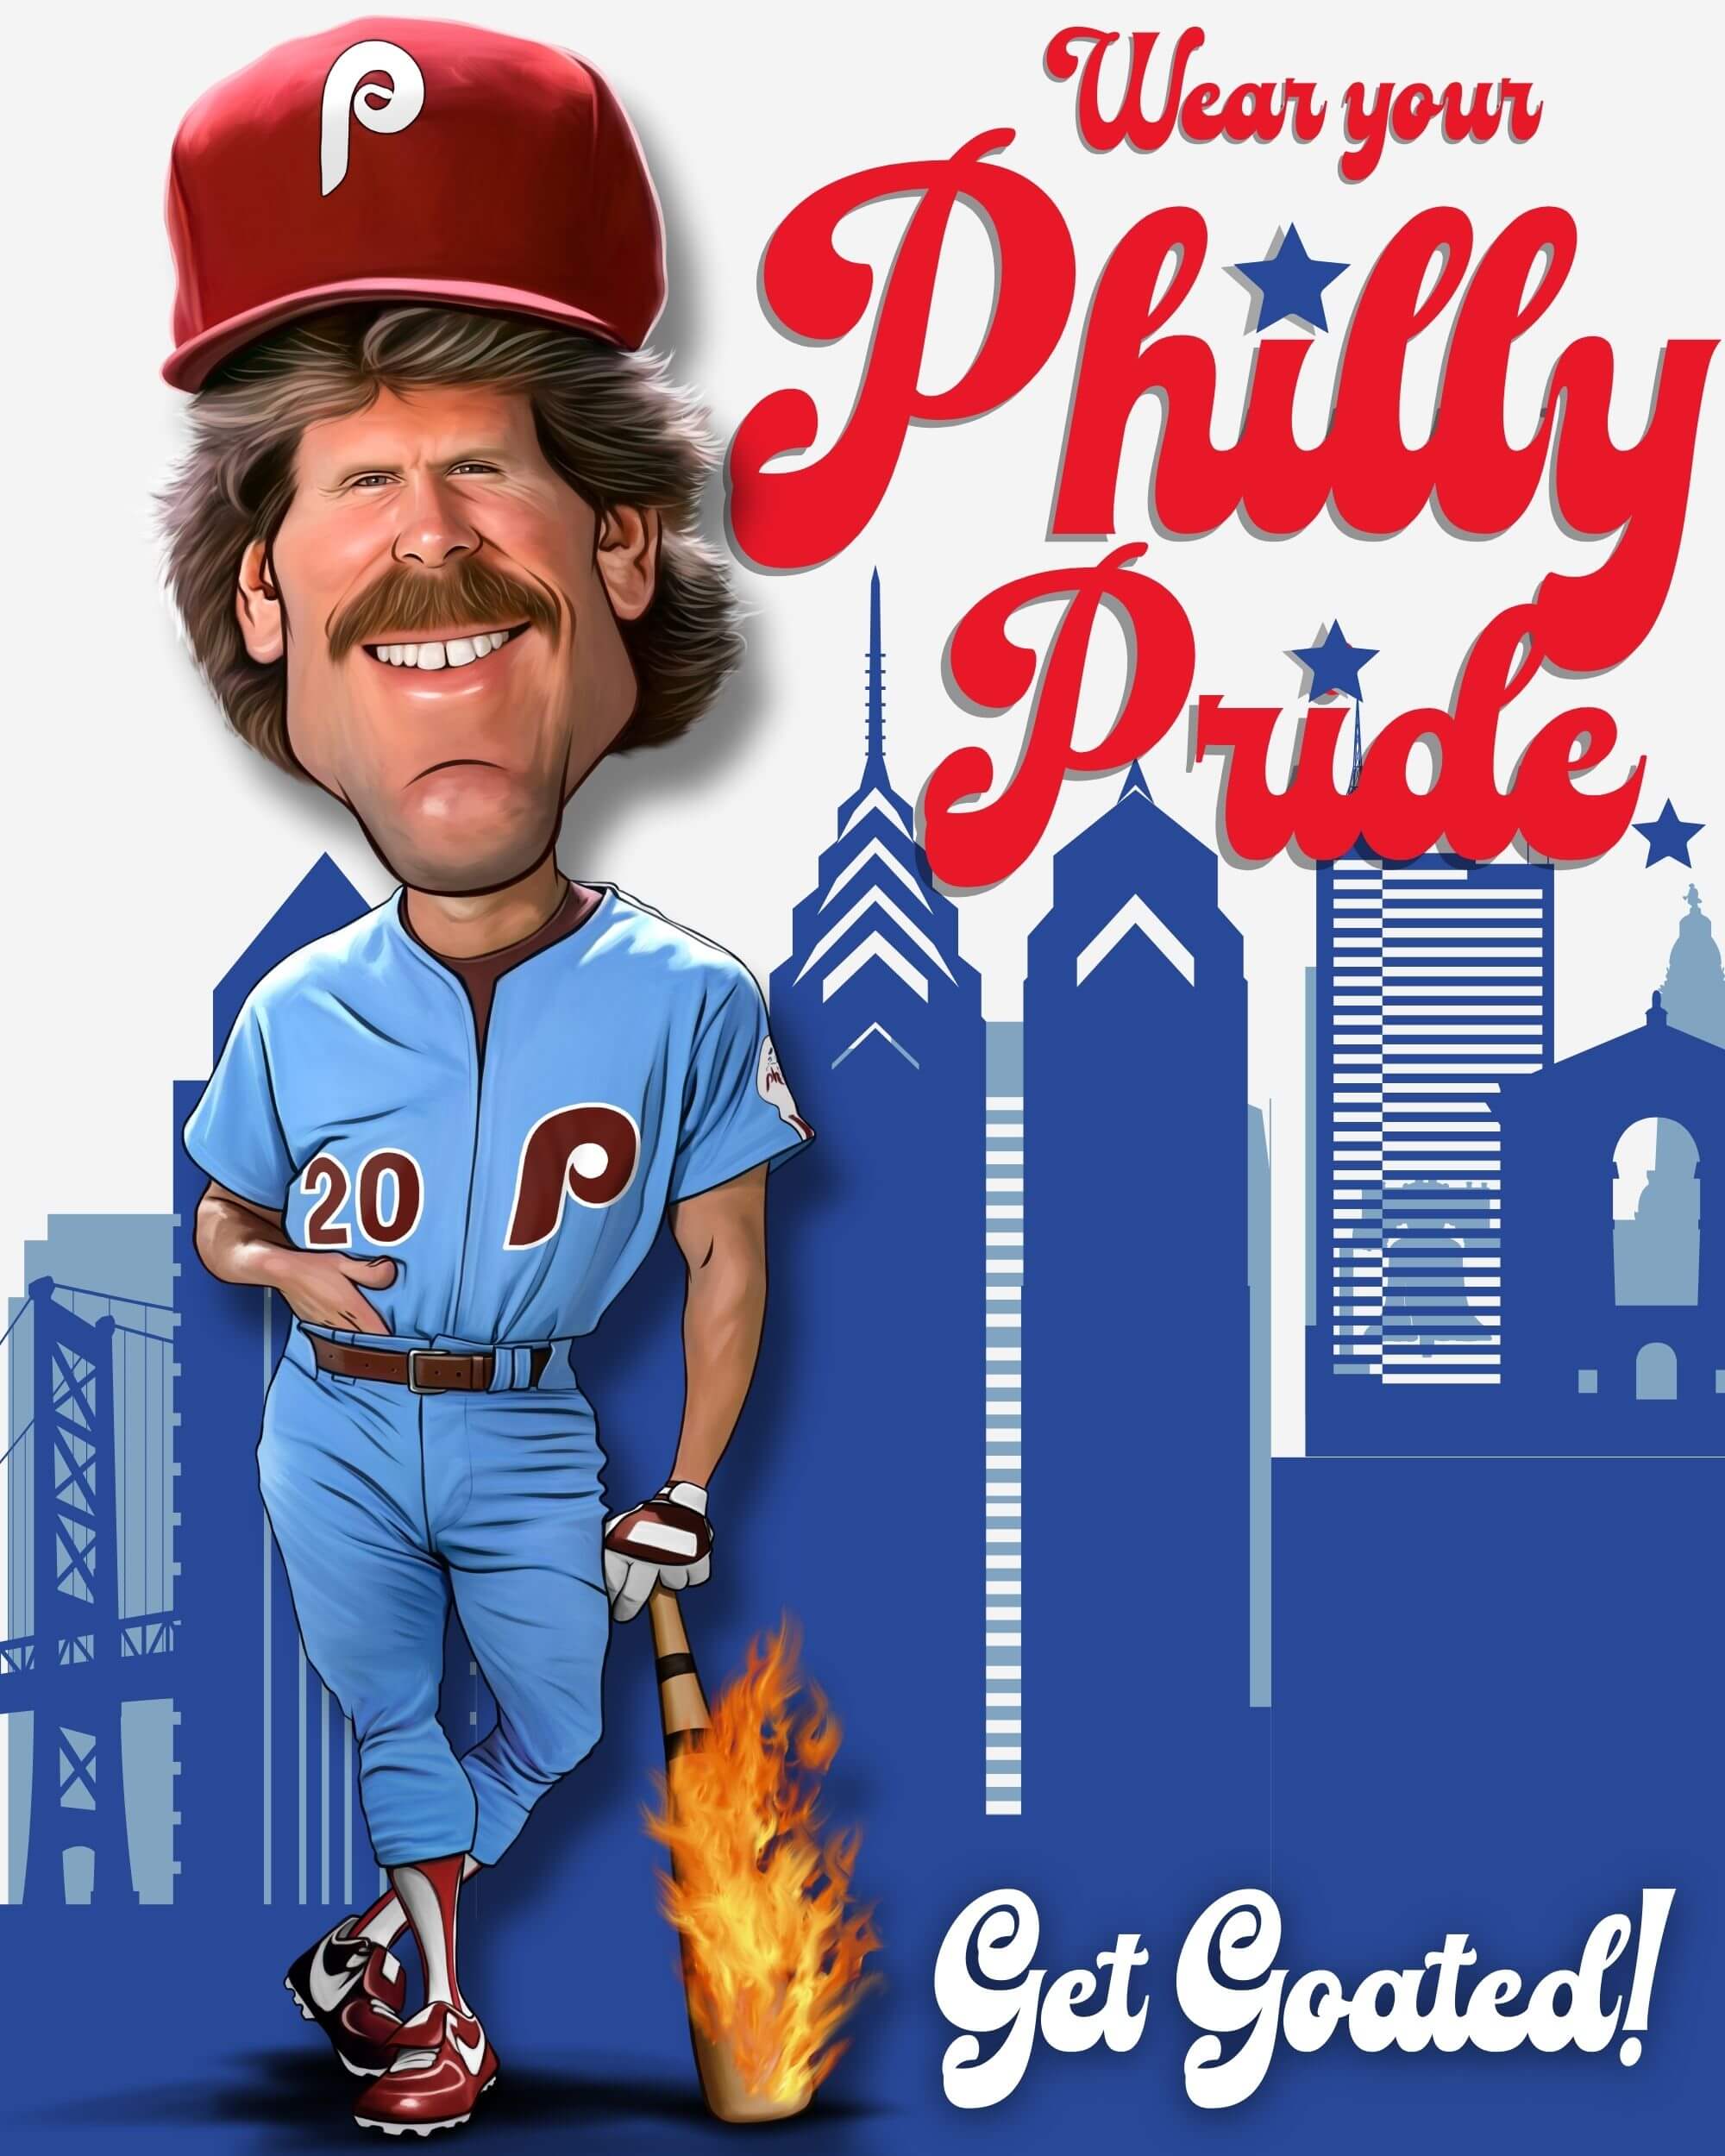 Phillygoat header image featuring a Mike Schmidt caricature in a Philadelphia Phillies uniform with the tagline "Wear Your Philly Pride" and Get Goated!